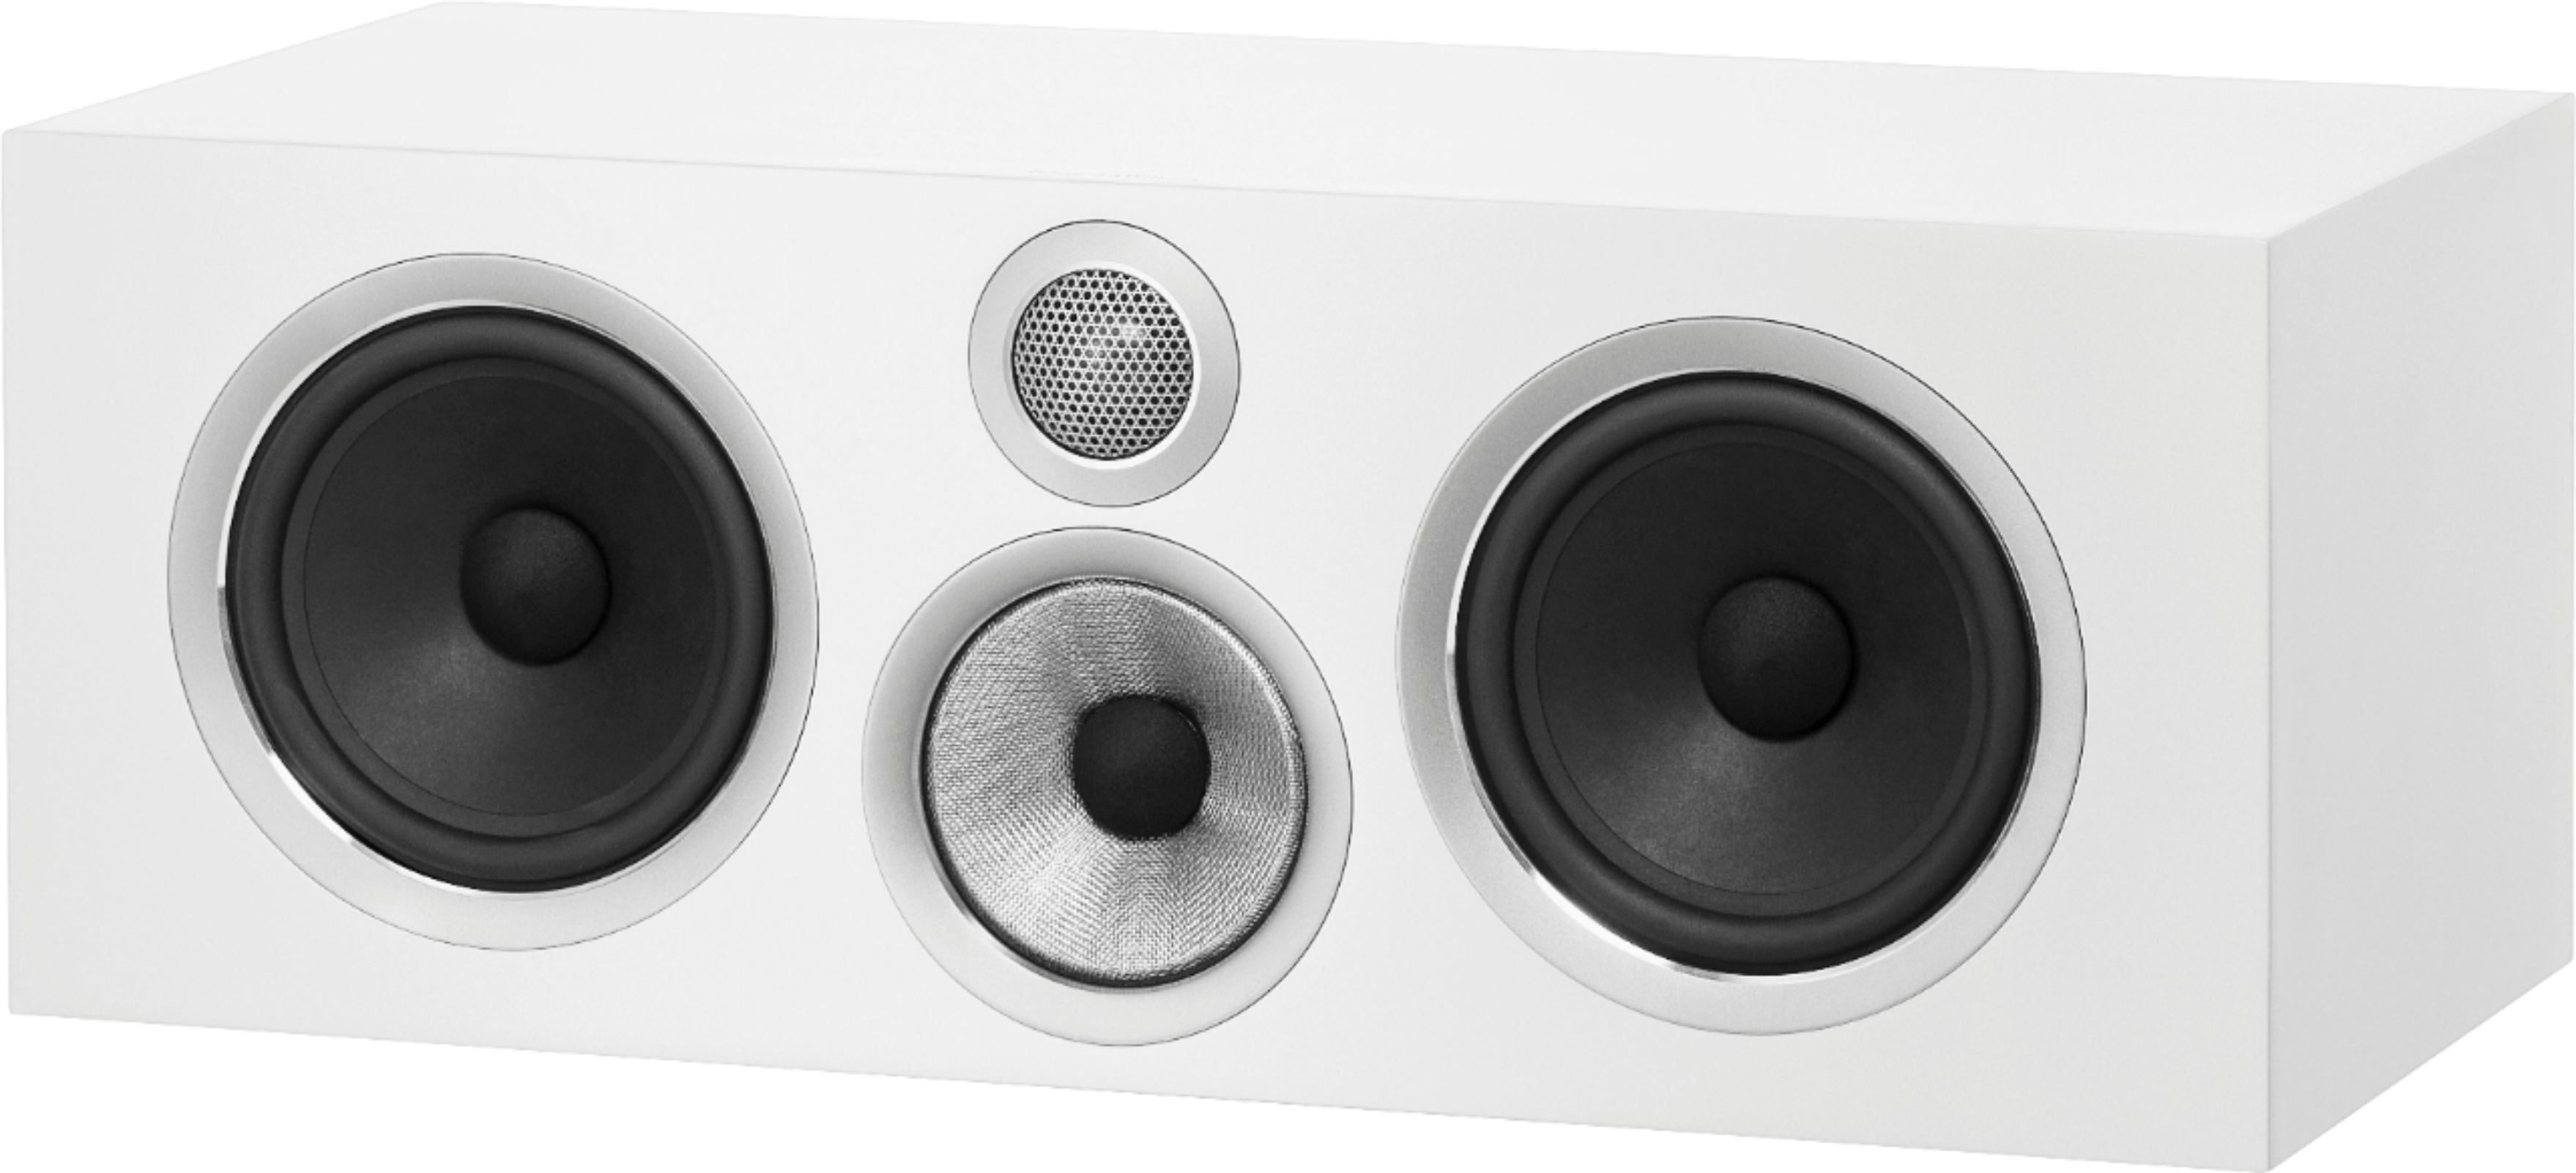 Angle View: KEF - Q Series 6.5" 2.5-Way Center-Channel Speaker - Satin Black